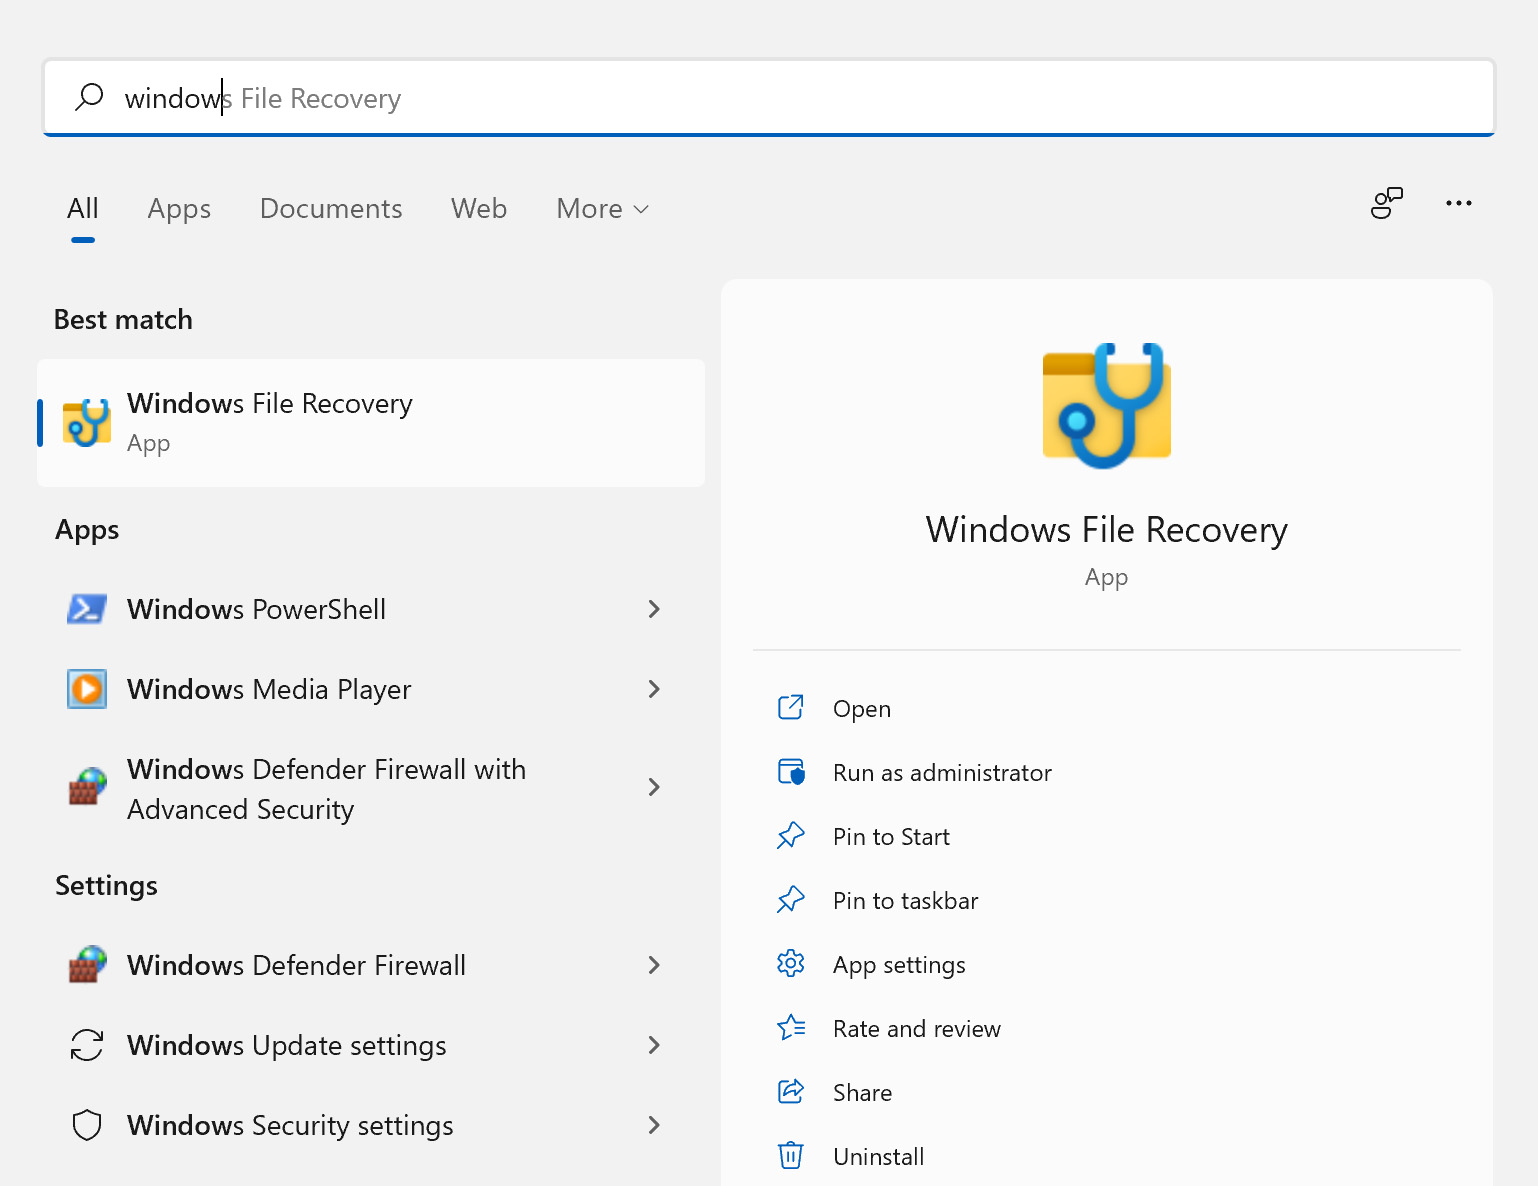 search Windows File Recovery and run